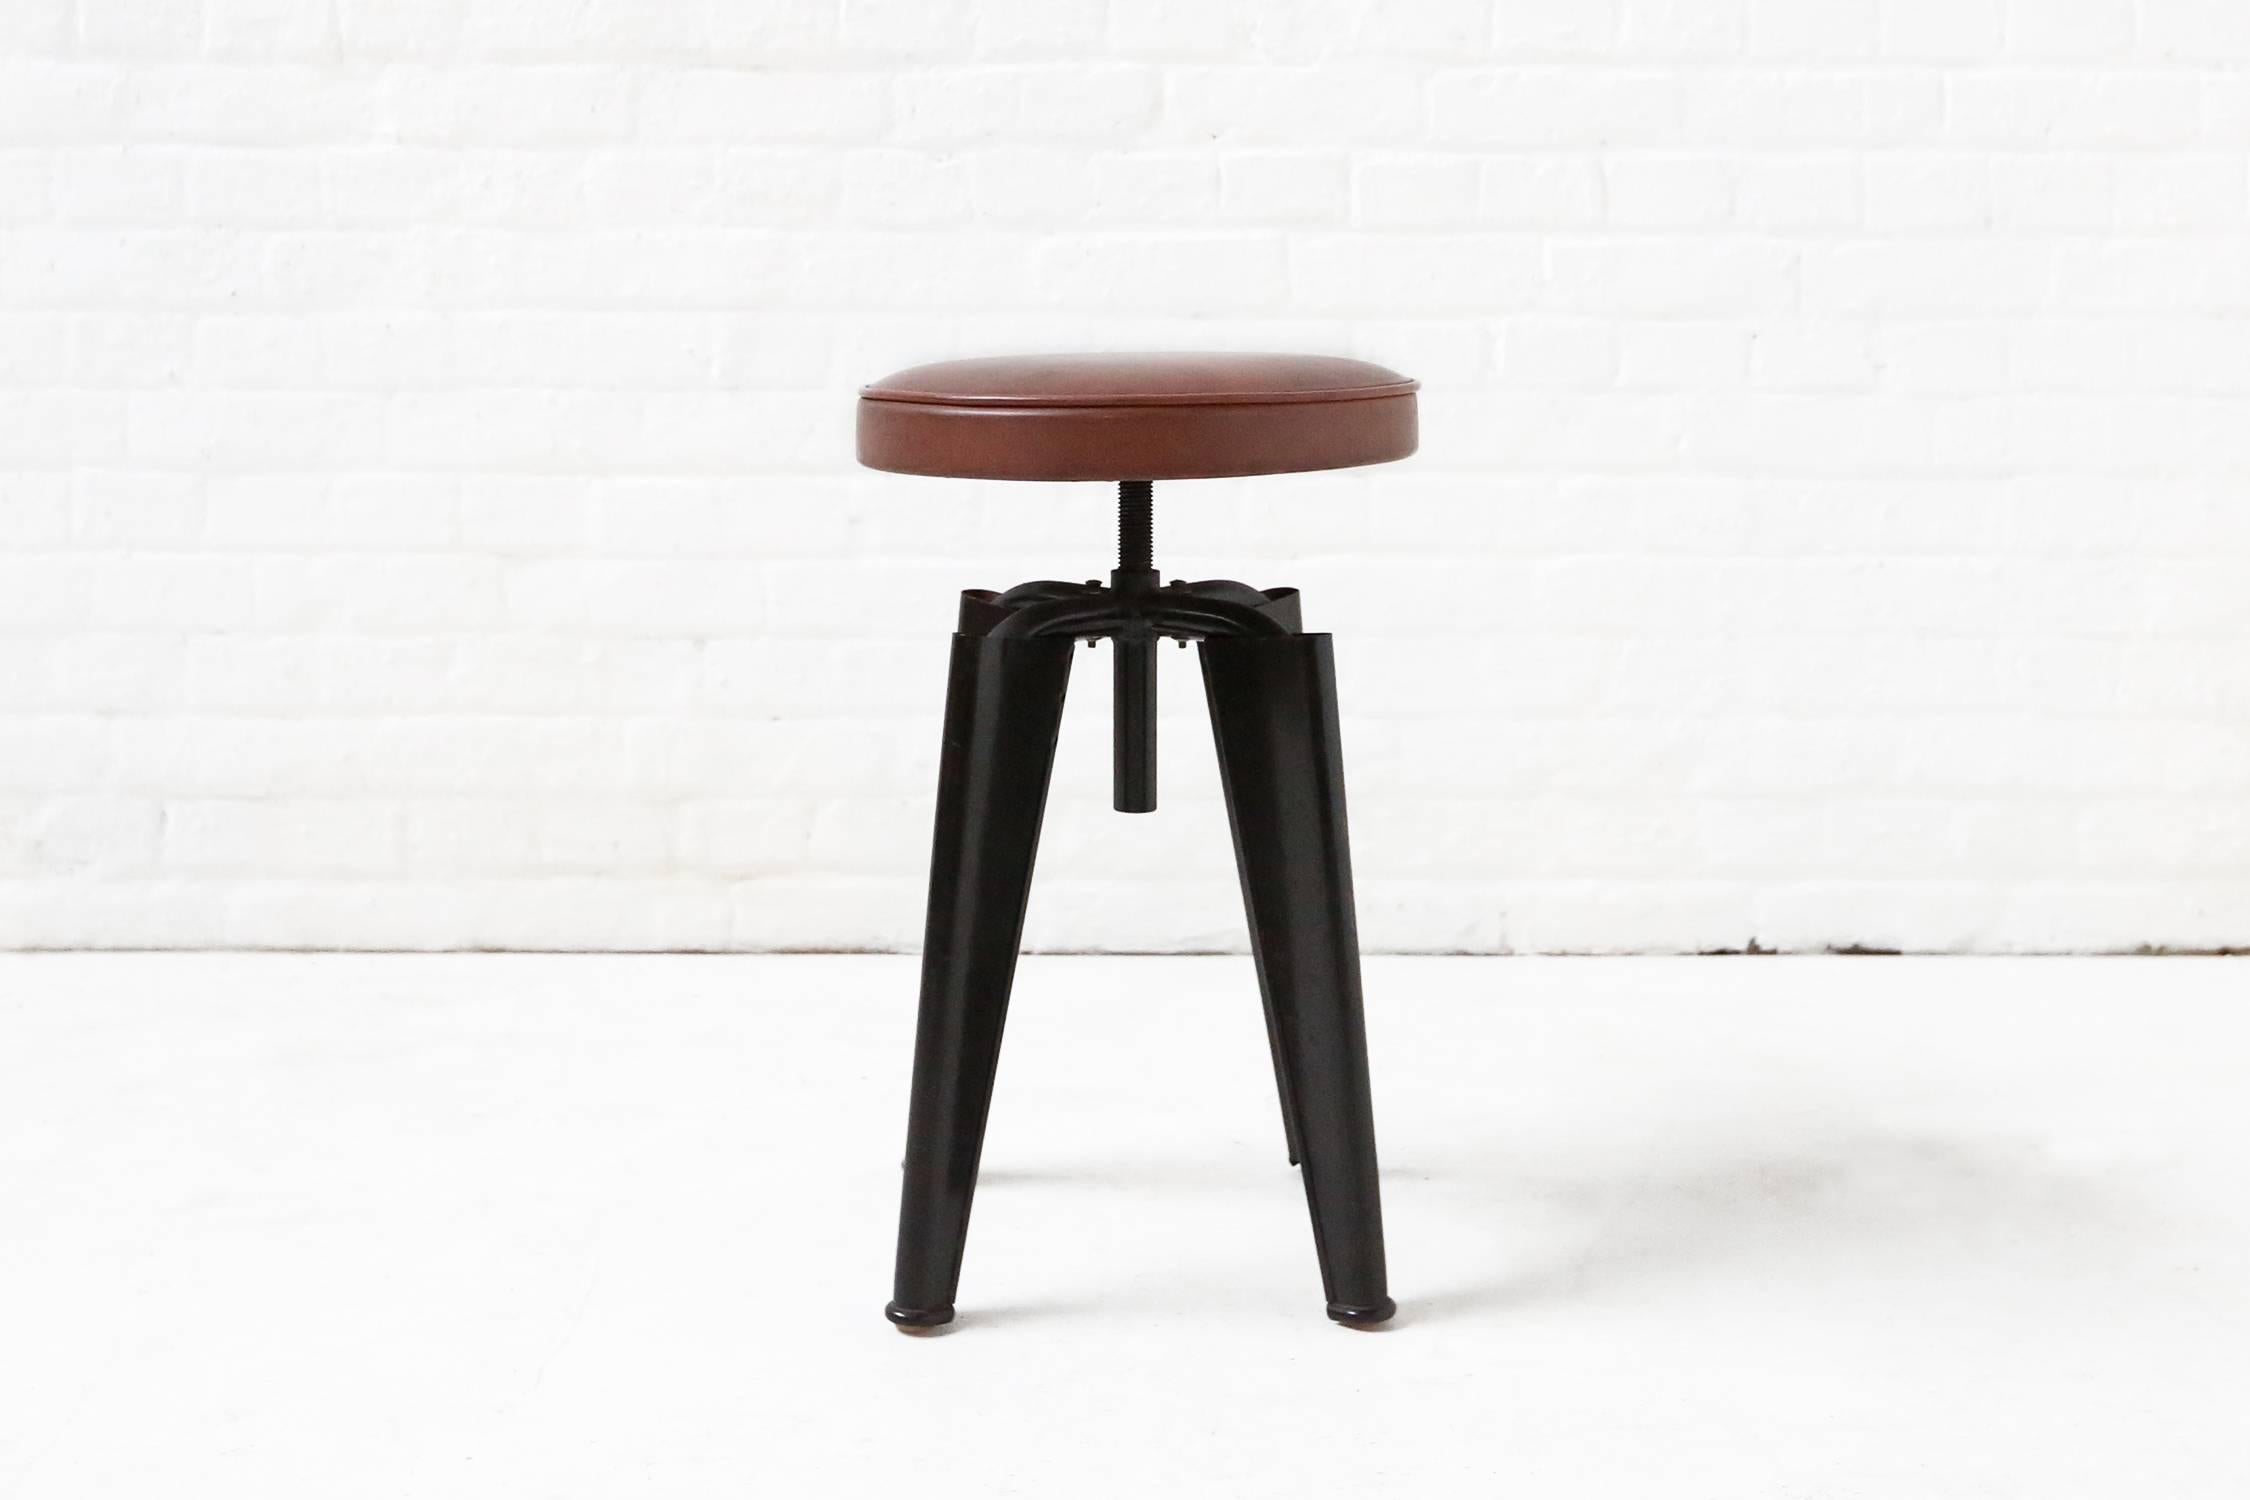 Extremely rare and beautiful adjustable height stool by Jules Leleu, circa 1945 clearing showing the influence of Jean Prouve on this design. Prouve and Leleu had collaborated together in 1939 to produce furniture for the Sanatorium Martel de